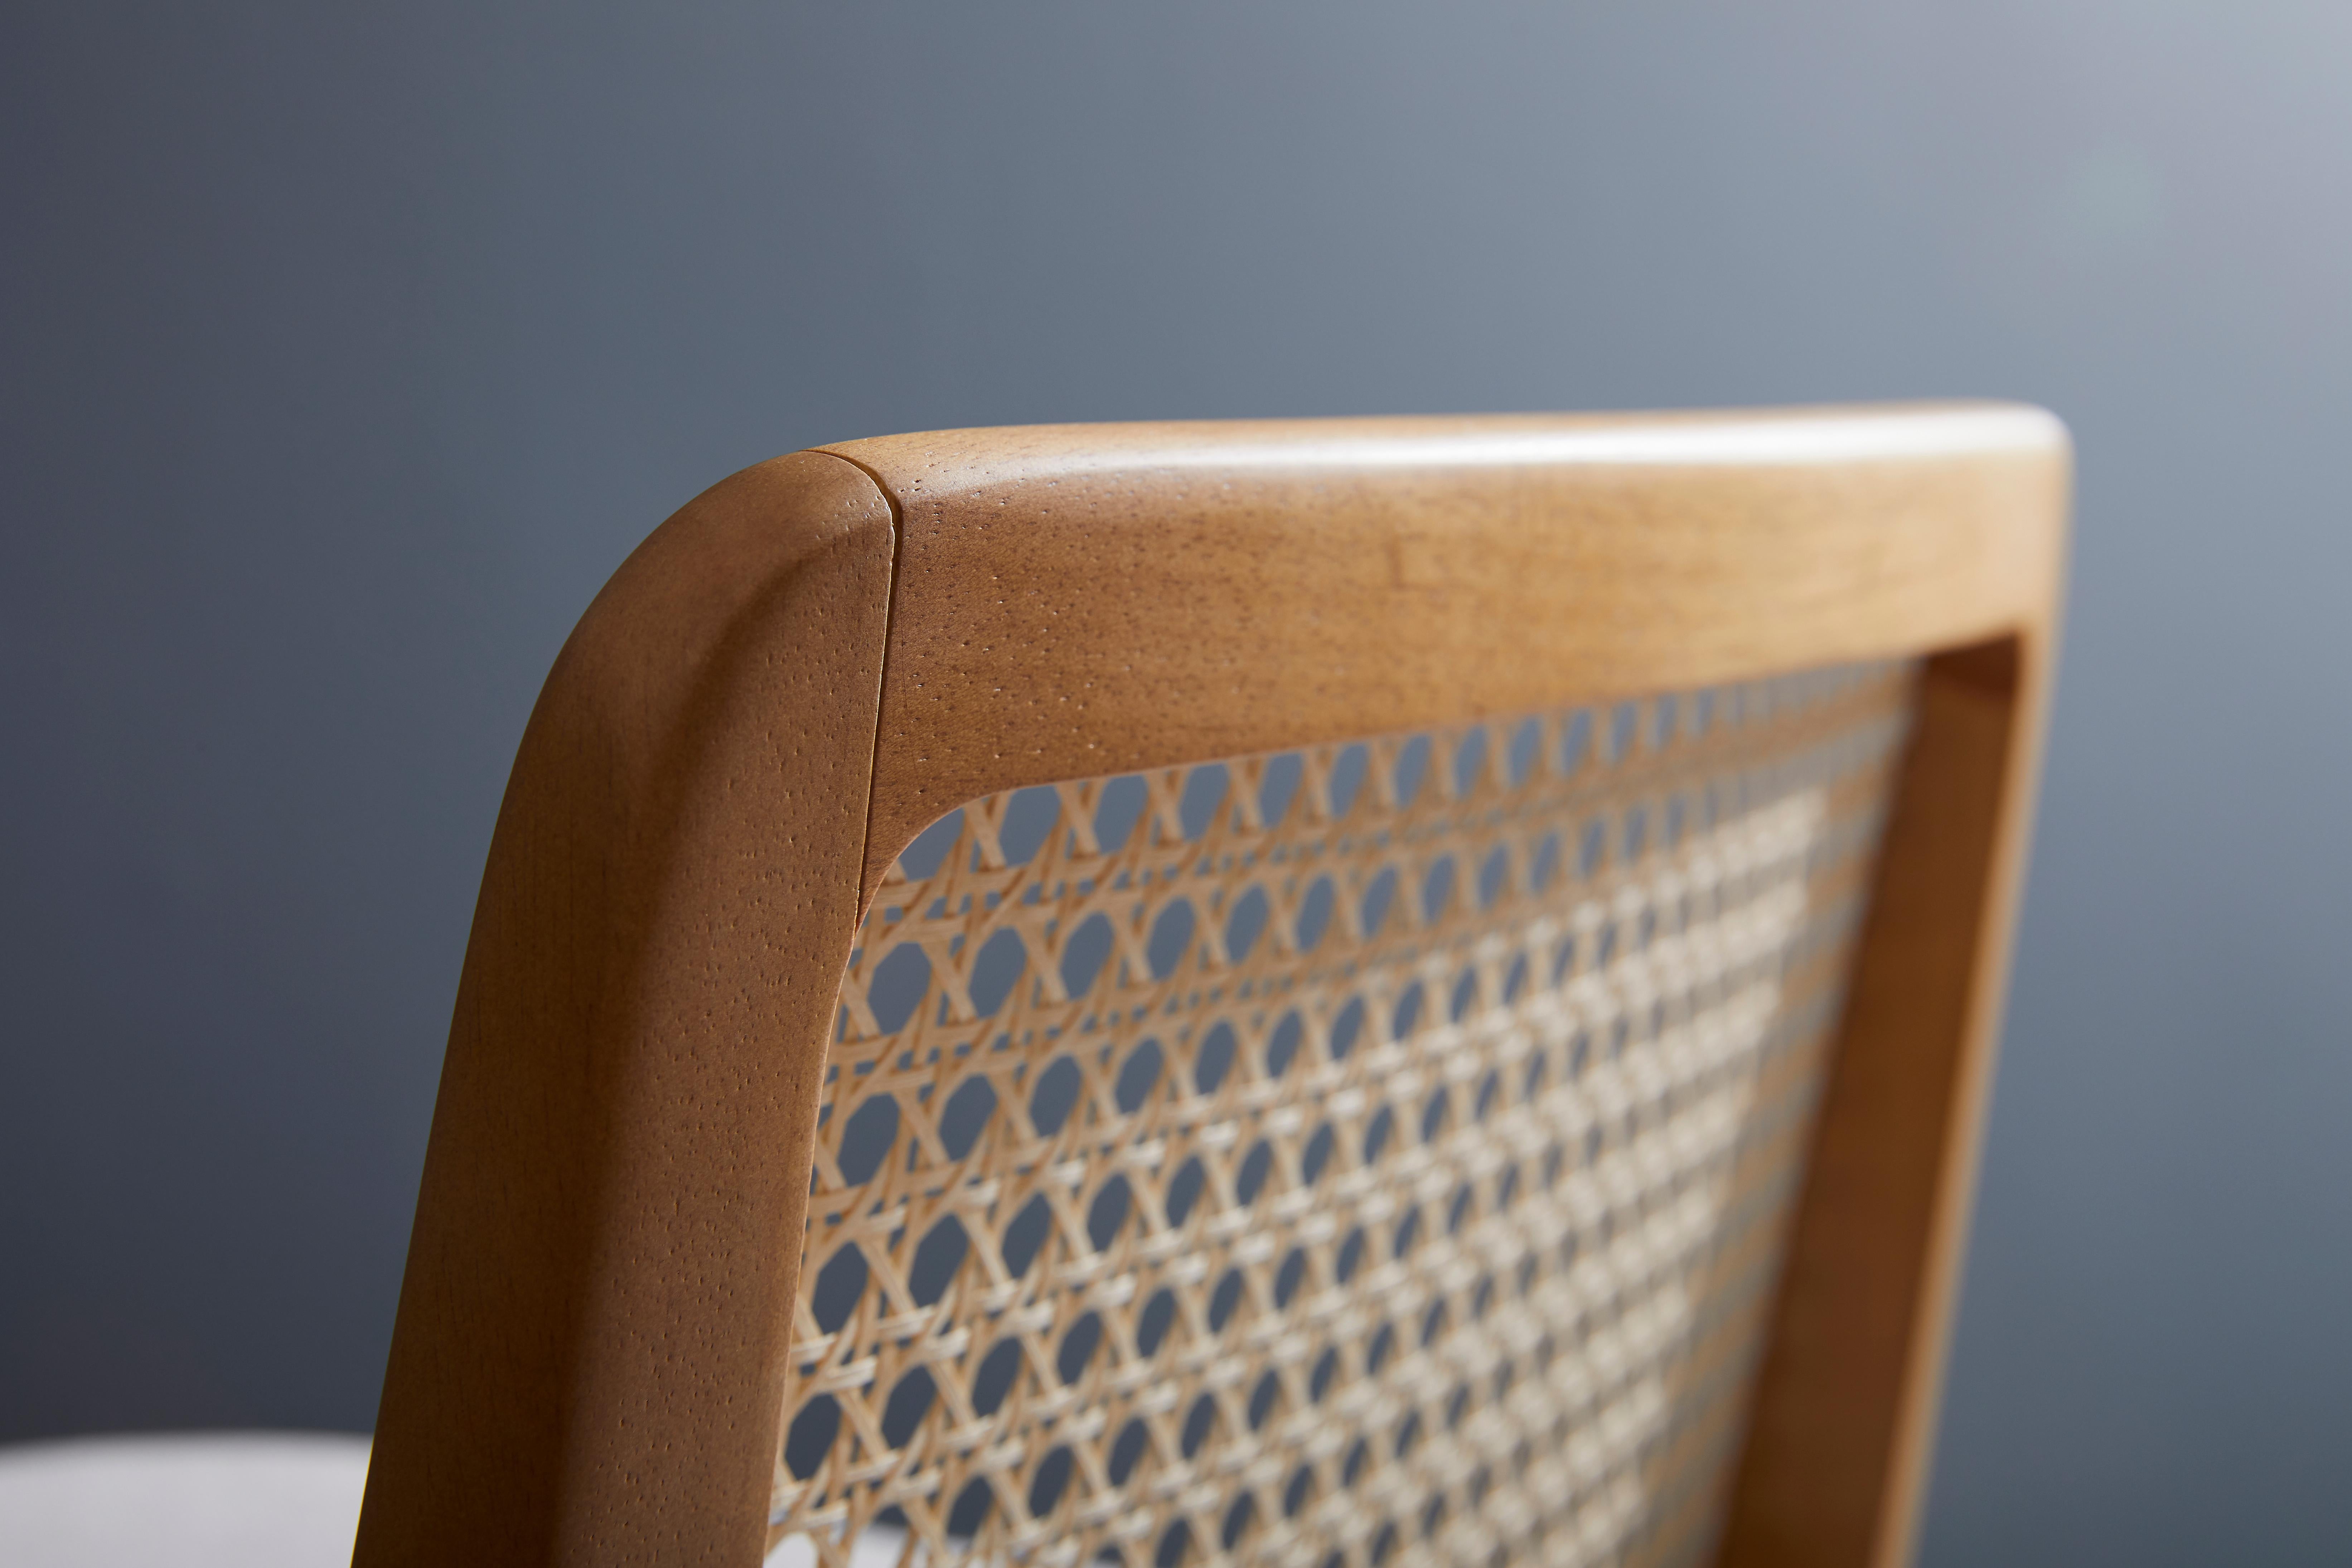 Contemporary Minimal Style, Solid Wood Stool, Textiles or Leather Seatings, Caning Backboard For Sale